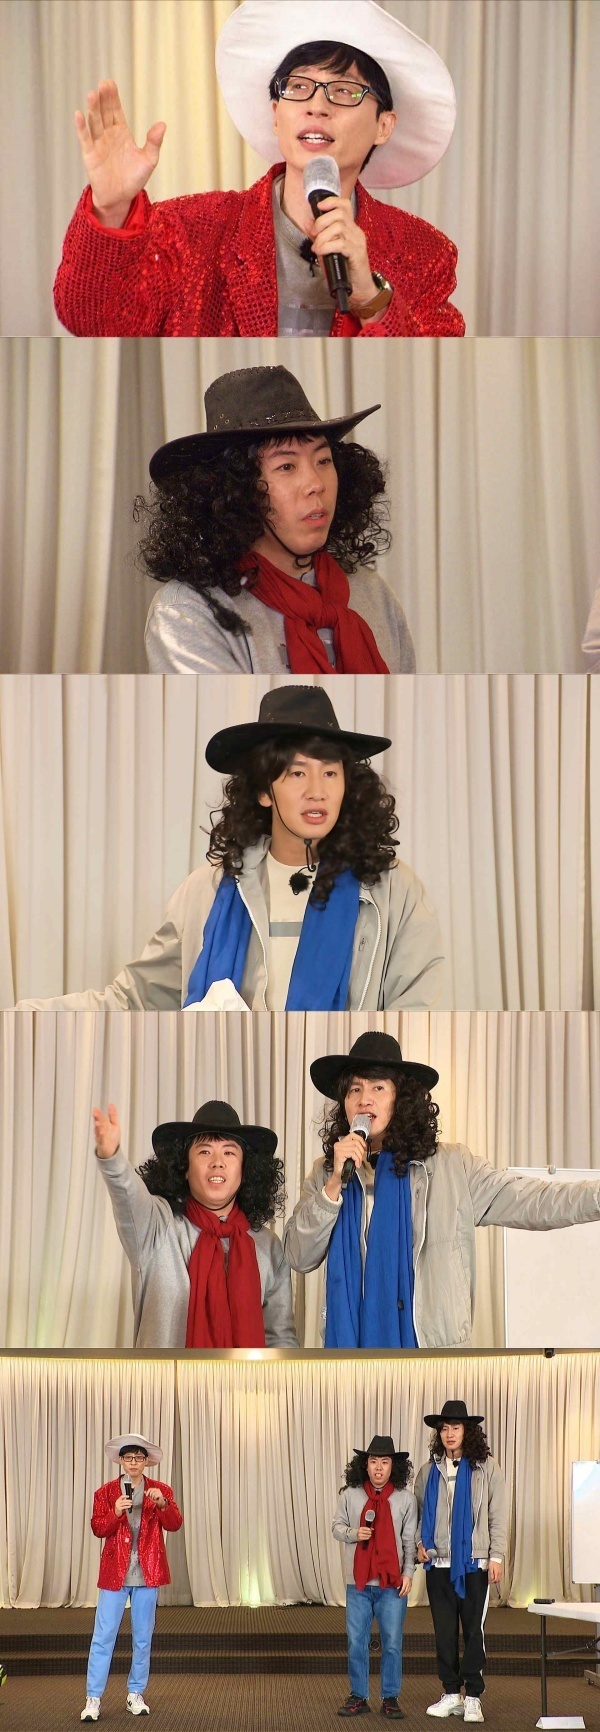 Yoo Sin-seul is being summoned to Running Man.On SBS Running Man, which will be broadcast on March 28, Yang Se-chans Yoo Jae-Suk Diss song will be released.The recent recording was divided into four representatives of entertainment agencies and six entertainers, and it was decorated with a race to wage a contract war, and it was time to boast the personal life of an entertainer belonging to the agency.Among them, Yang Se-chan decided to play Psychorus corner with Lee Kwang-soo, and showed Yoo Jae-Suk Diss exhibition with the lyrics of Redevelopment of Love by improvising Yoo Jae-Suks official bouquet Yusanseul.In particular, the three previous collaborations that can not be seen anywhere have attracted great attention with the trailers that were released earlier, adding to the expectation of this broadcast.When the stage began, Yang Se-chan attacked Yoo Jae-Suk as the appearance ranking is right, and listed ugly reasons such as deformed teeth.Even Yoo Jae-Suks physical defects broke out, and the stage eventually stopped, and Yoo Jae-Suk said, I will prepare for Lawsuit! And I can not do entertainment in the future!